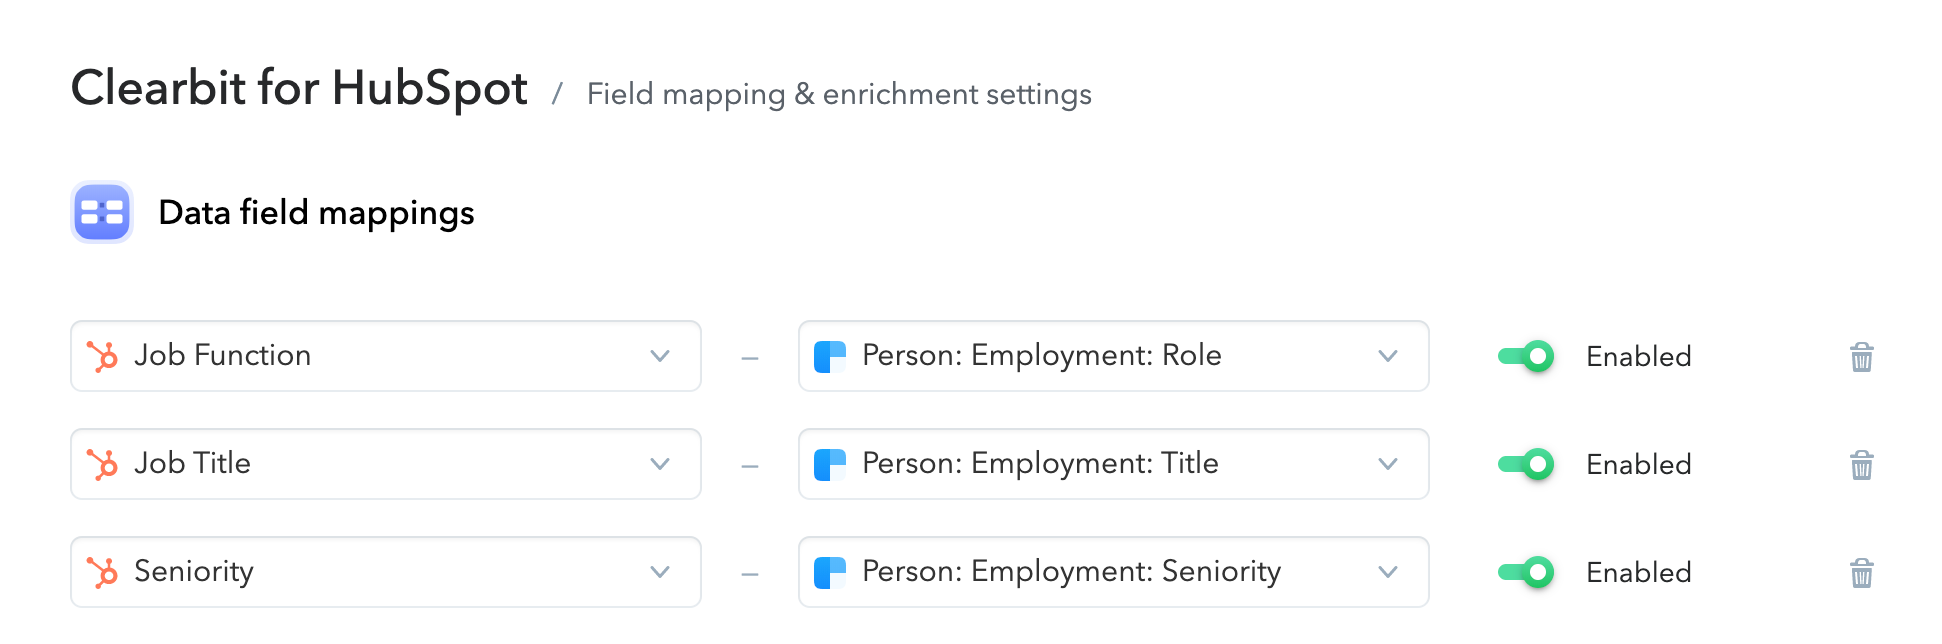 Clearbit role and title data syncing to HubSpot